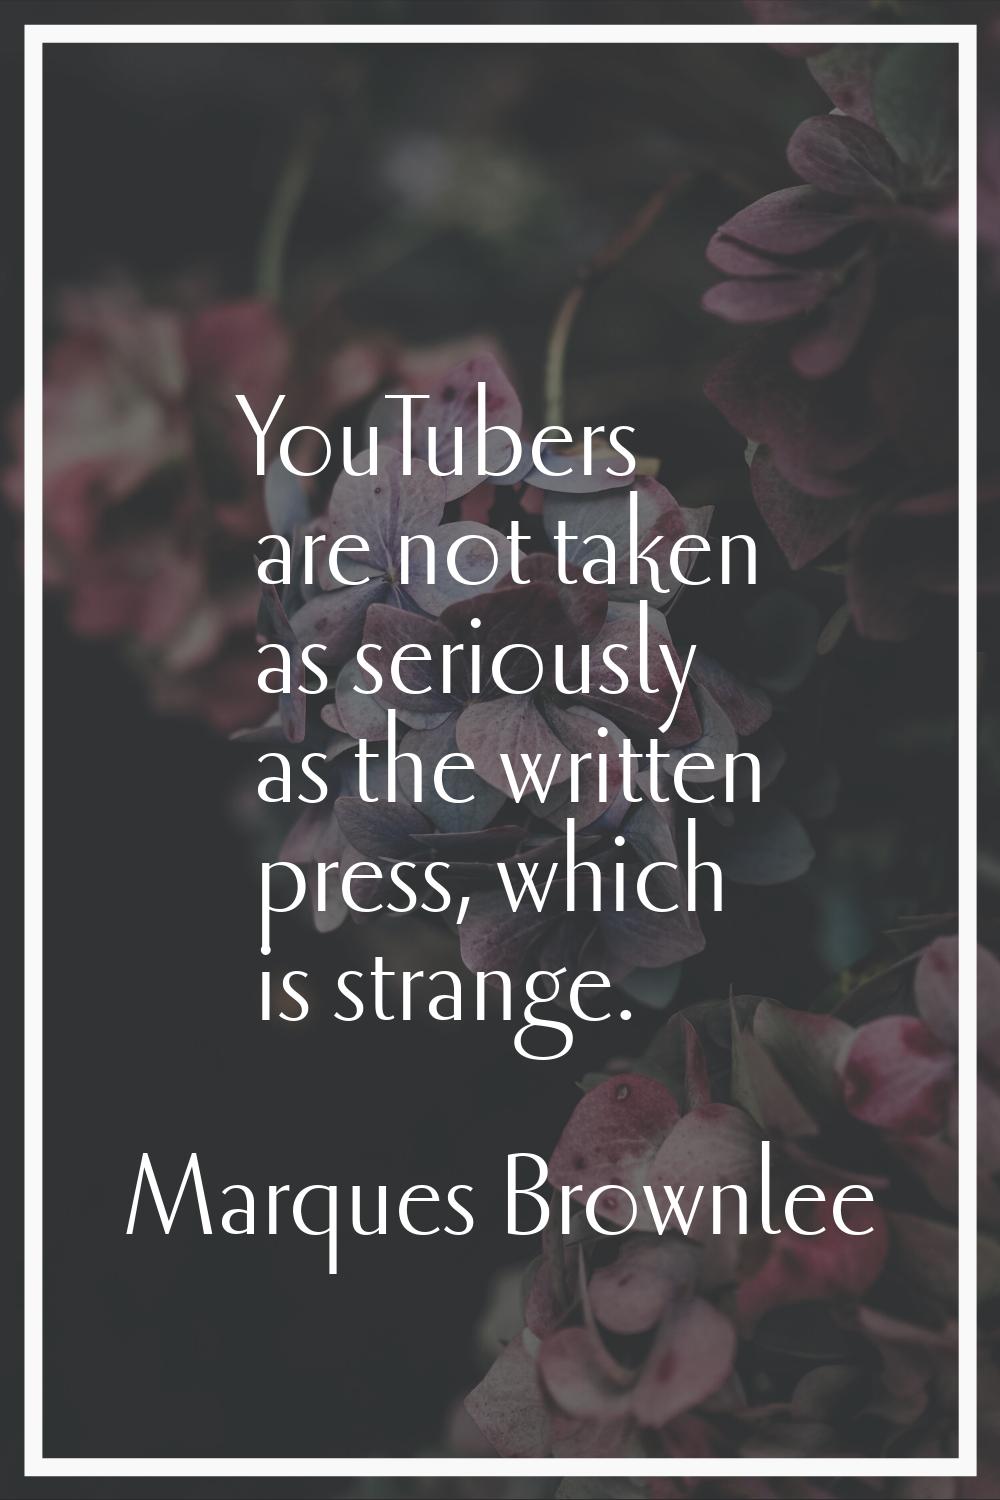 YouTubers are not taken as seriously as the written press, which is strange.